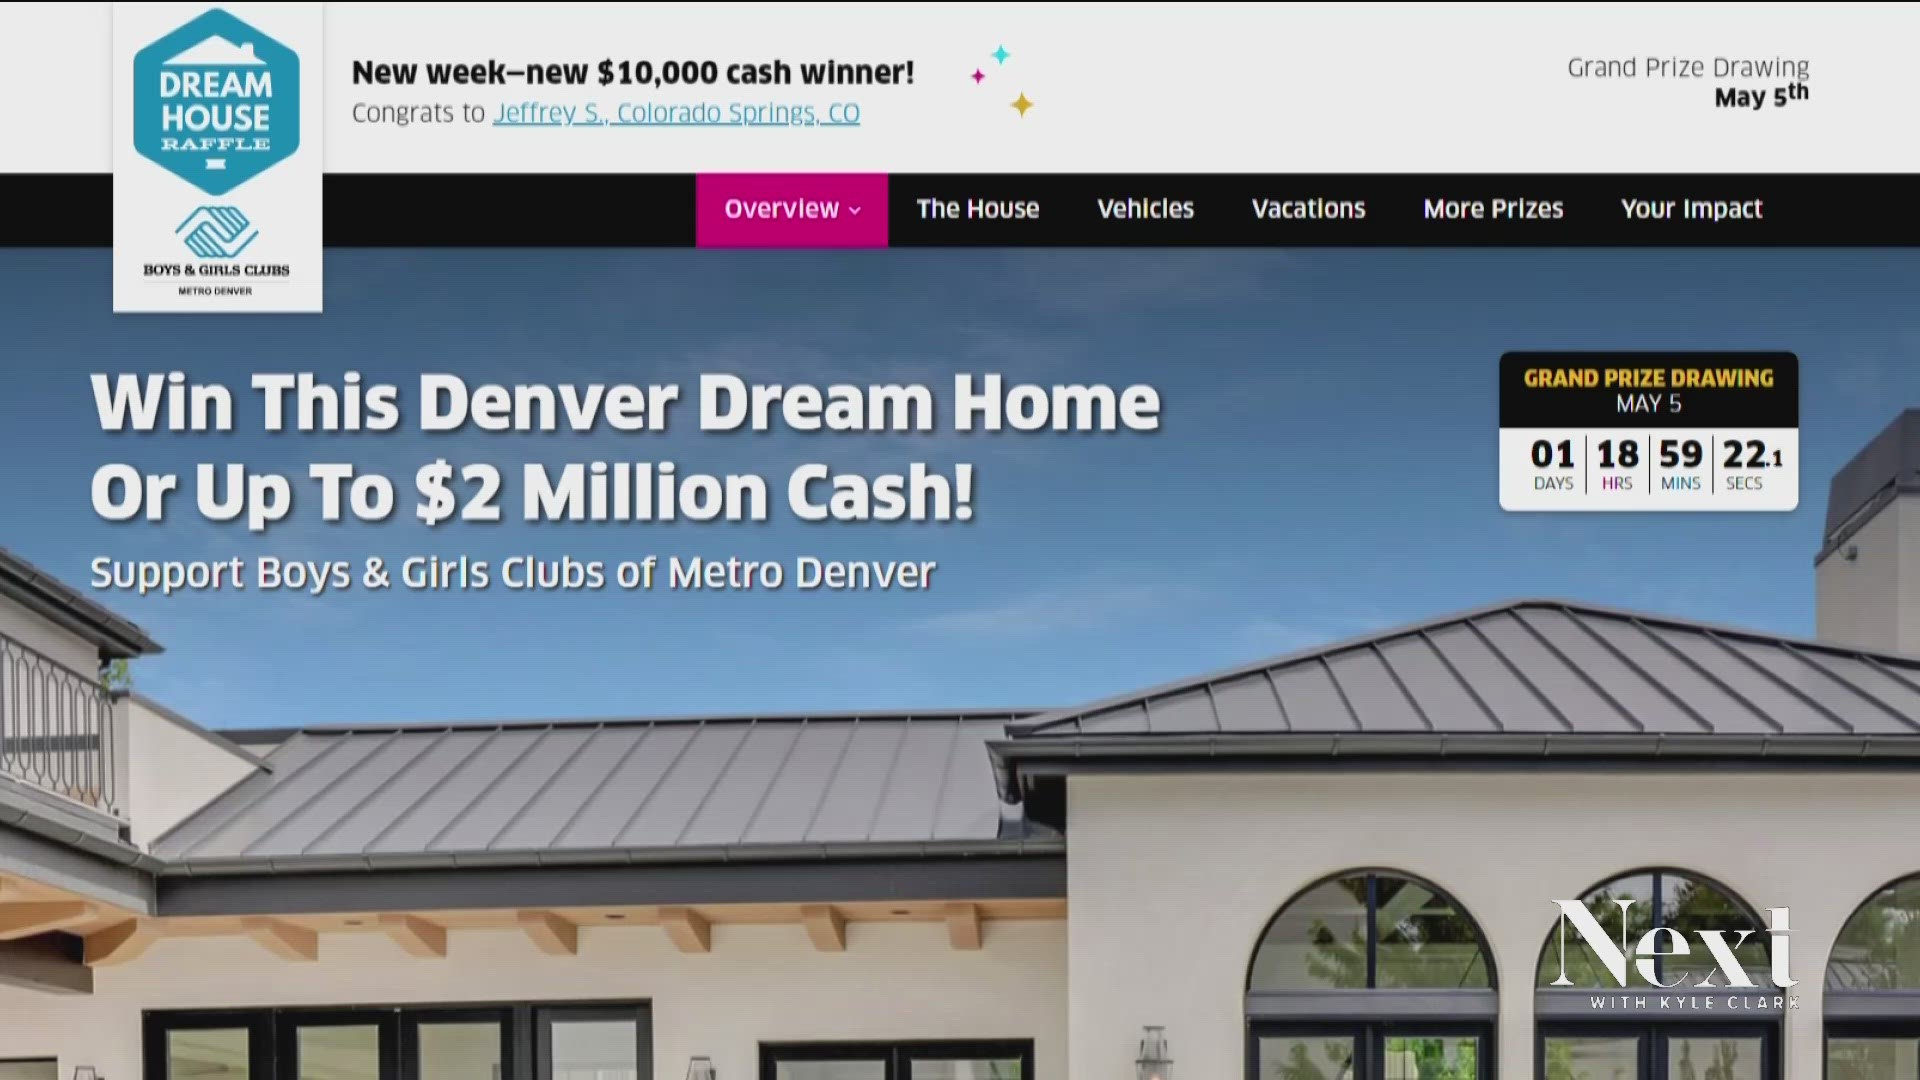 The raffle, also known as the Dream House Raffle, will have its grand prize drawing on Friday. When fewer than 80,000 tickets are sold, the grand prize is cash.